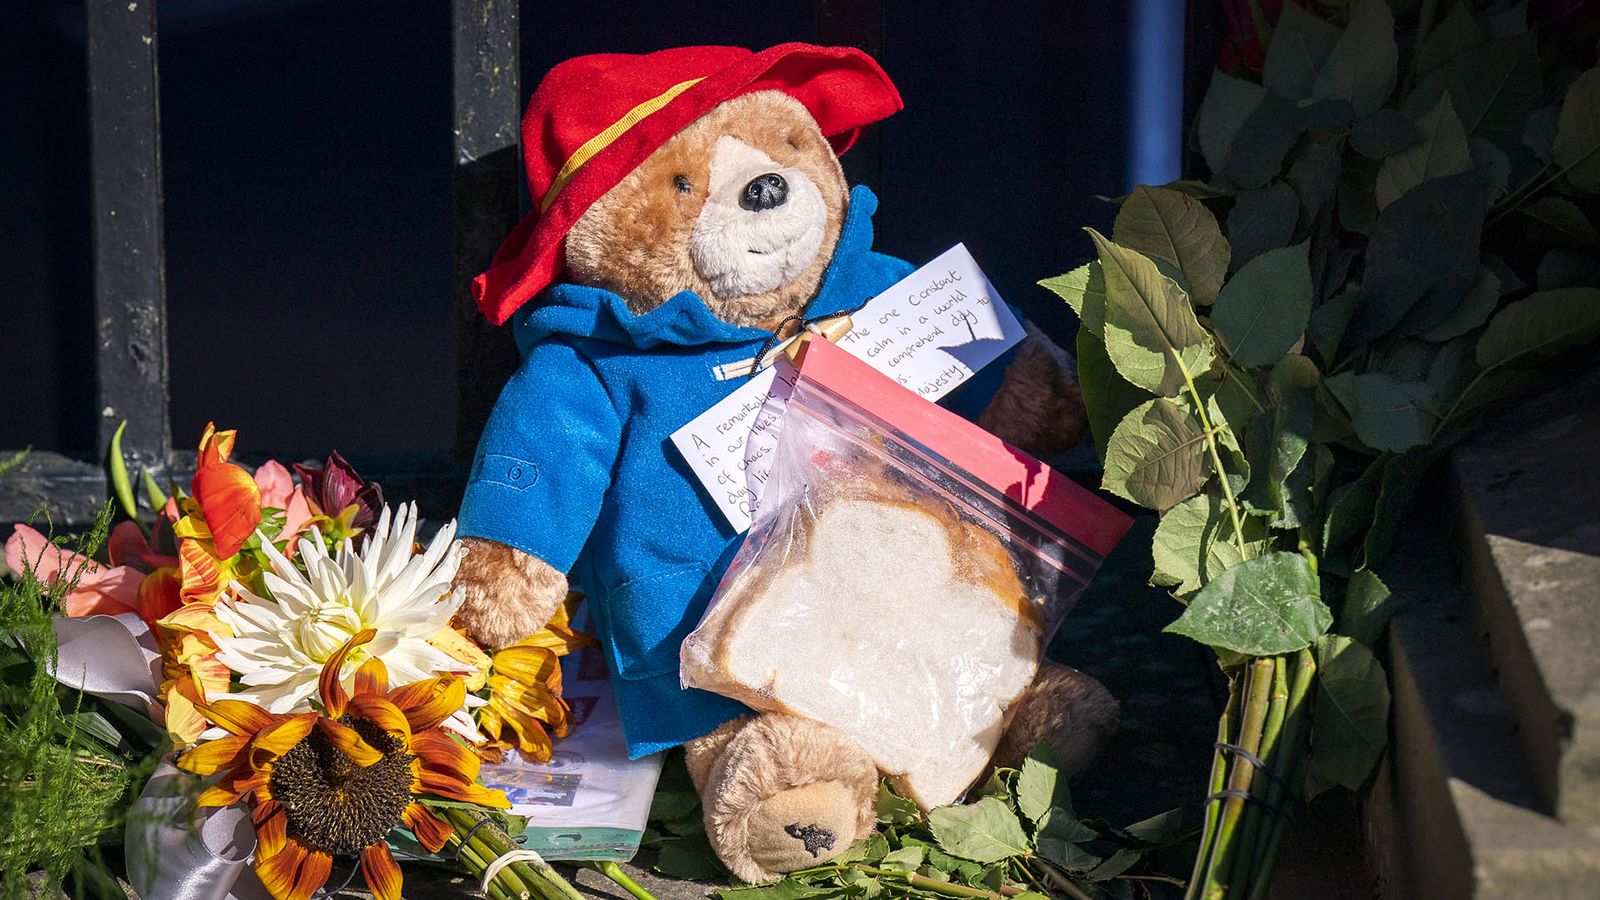 Mourners asked to stop leaving Paddingtons and marmalade sandwiches as Queen tributes | UK News